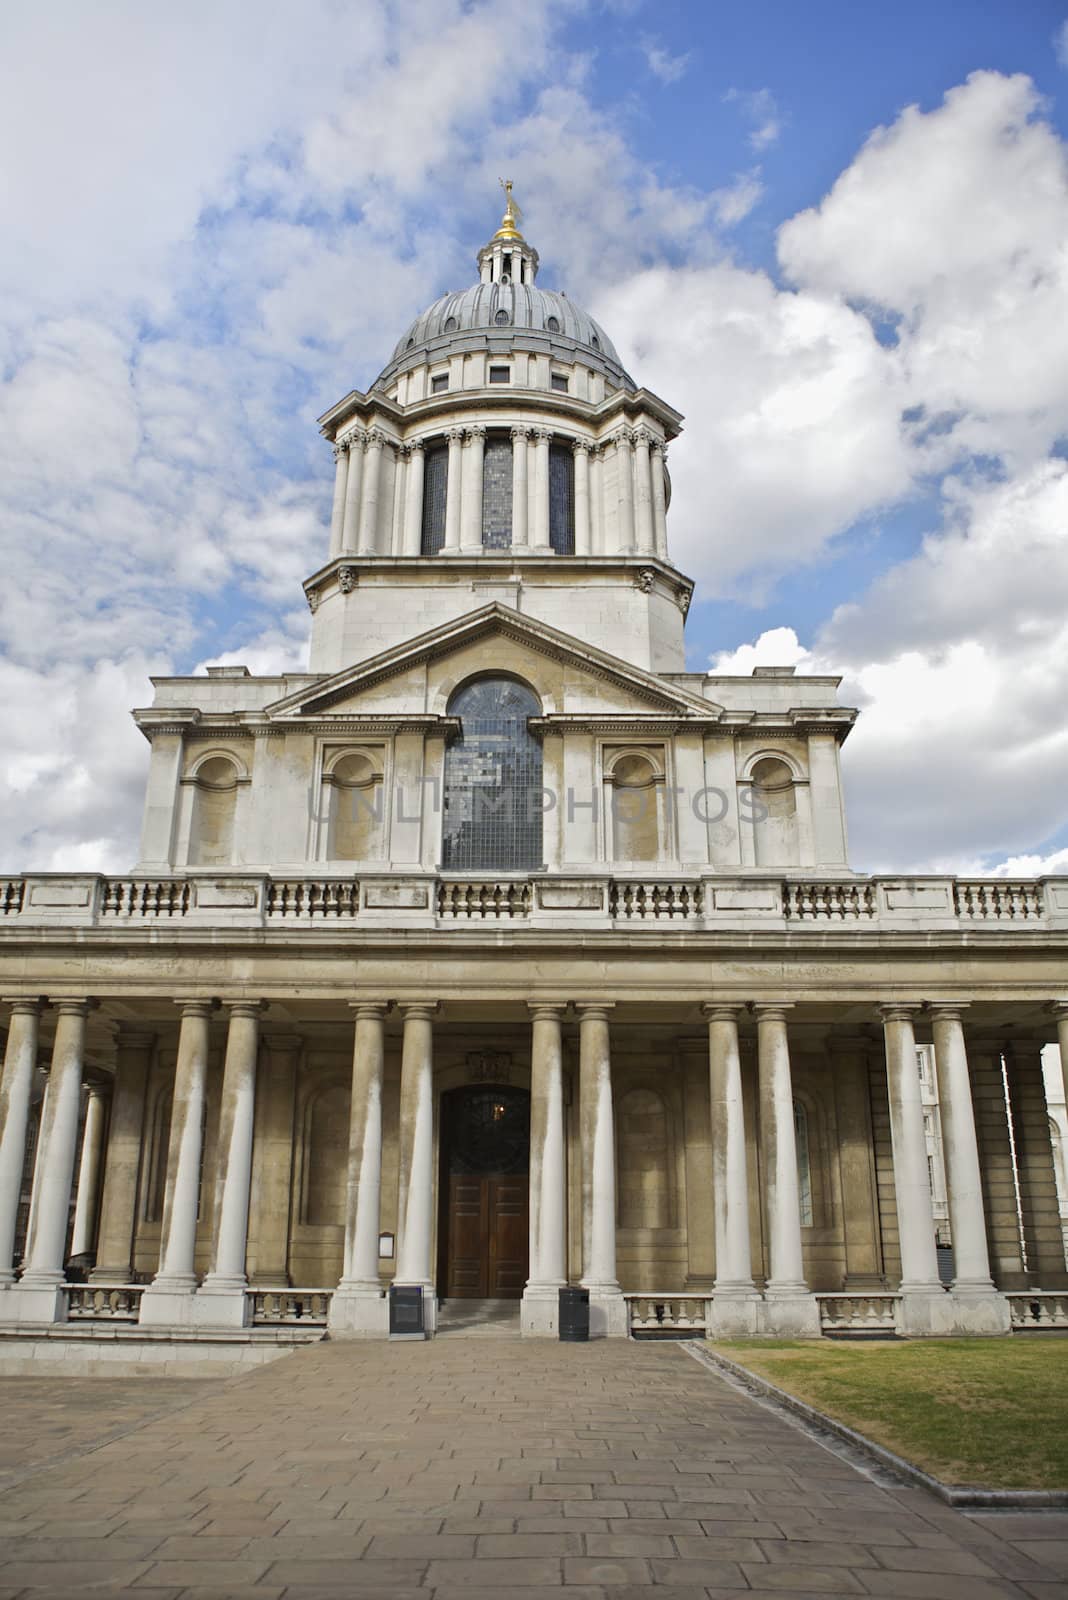 Architecture of the Royal Naval College and University of Greenwich in London, UK